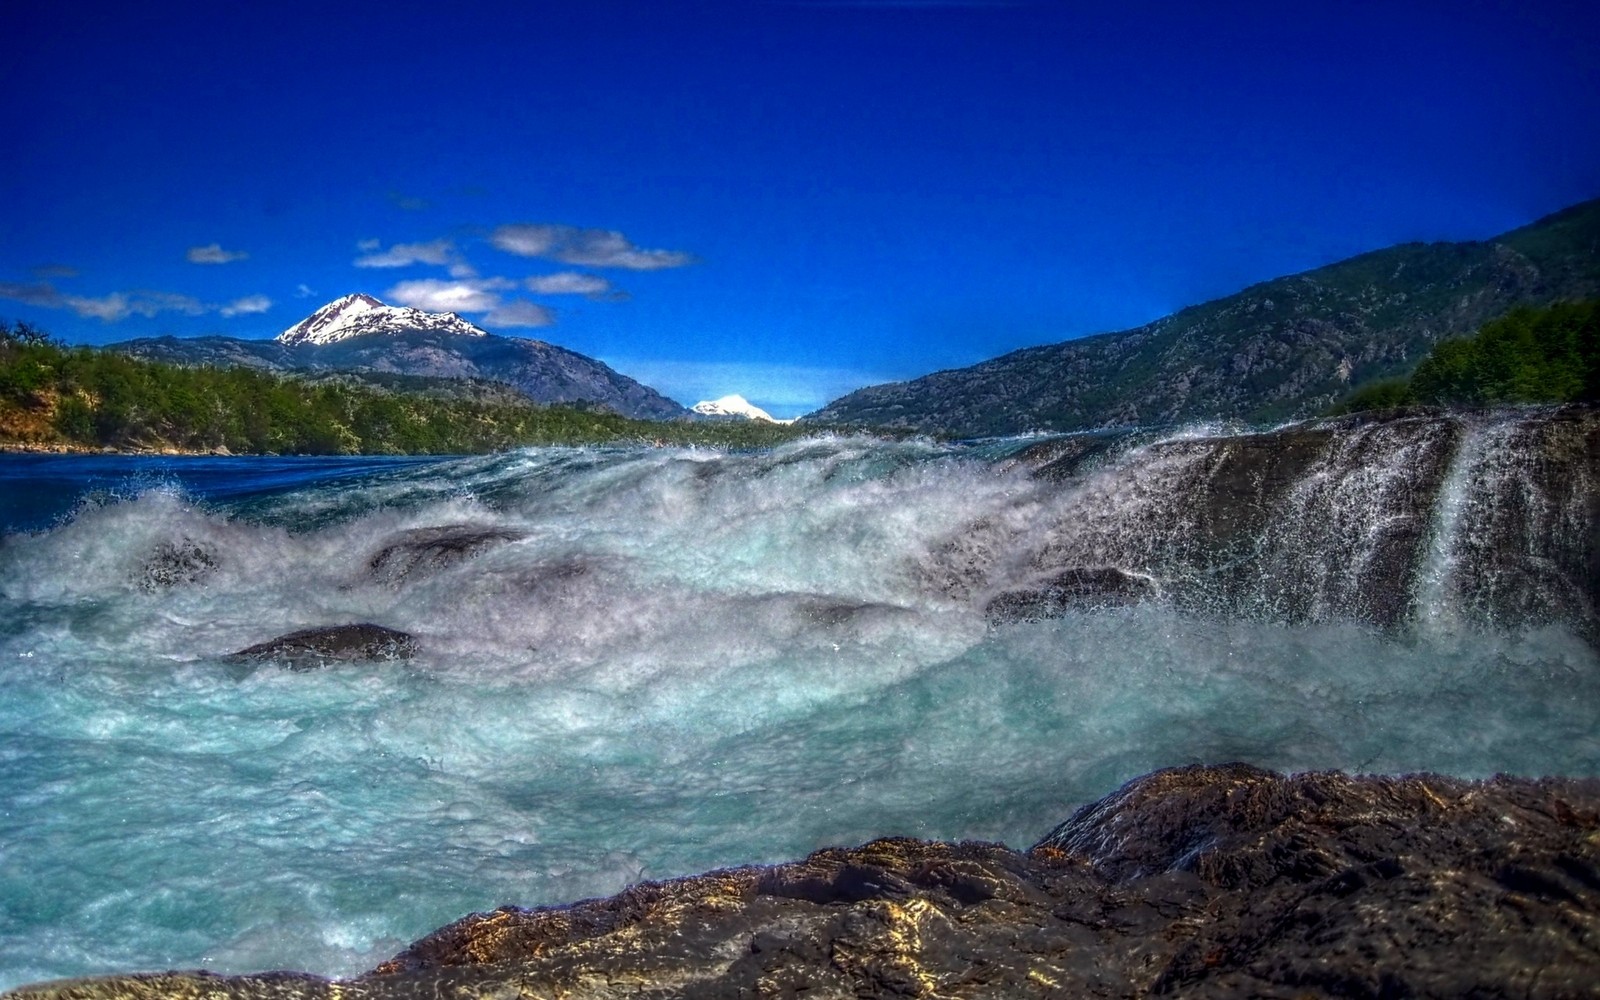 photography, Nature, Landscape, Blue, Sky, River, Rapids, Waterfall, Mountains, Snowy peak, Patagonia, Chile Wallpaper